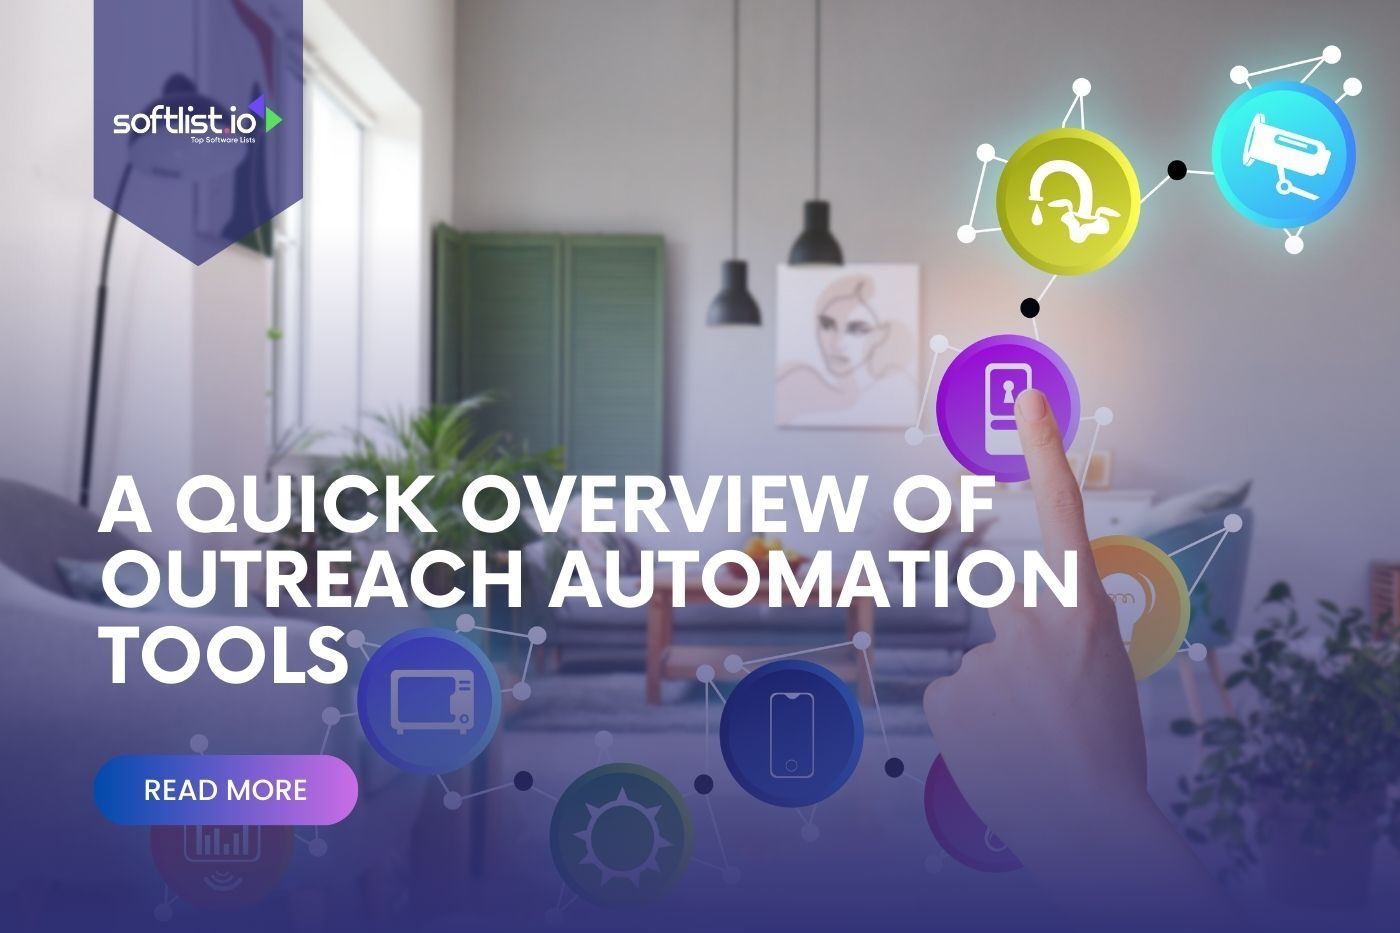 A Quick Overview of Outreach Automation Tools